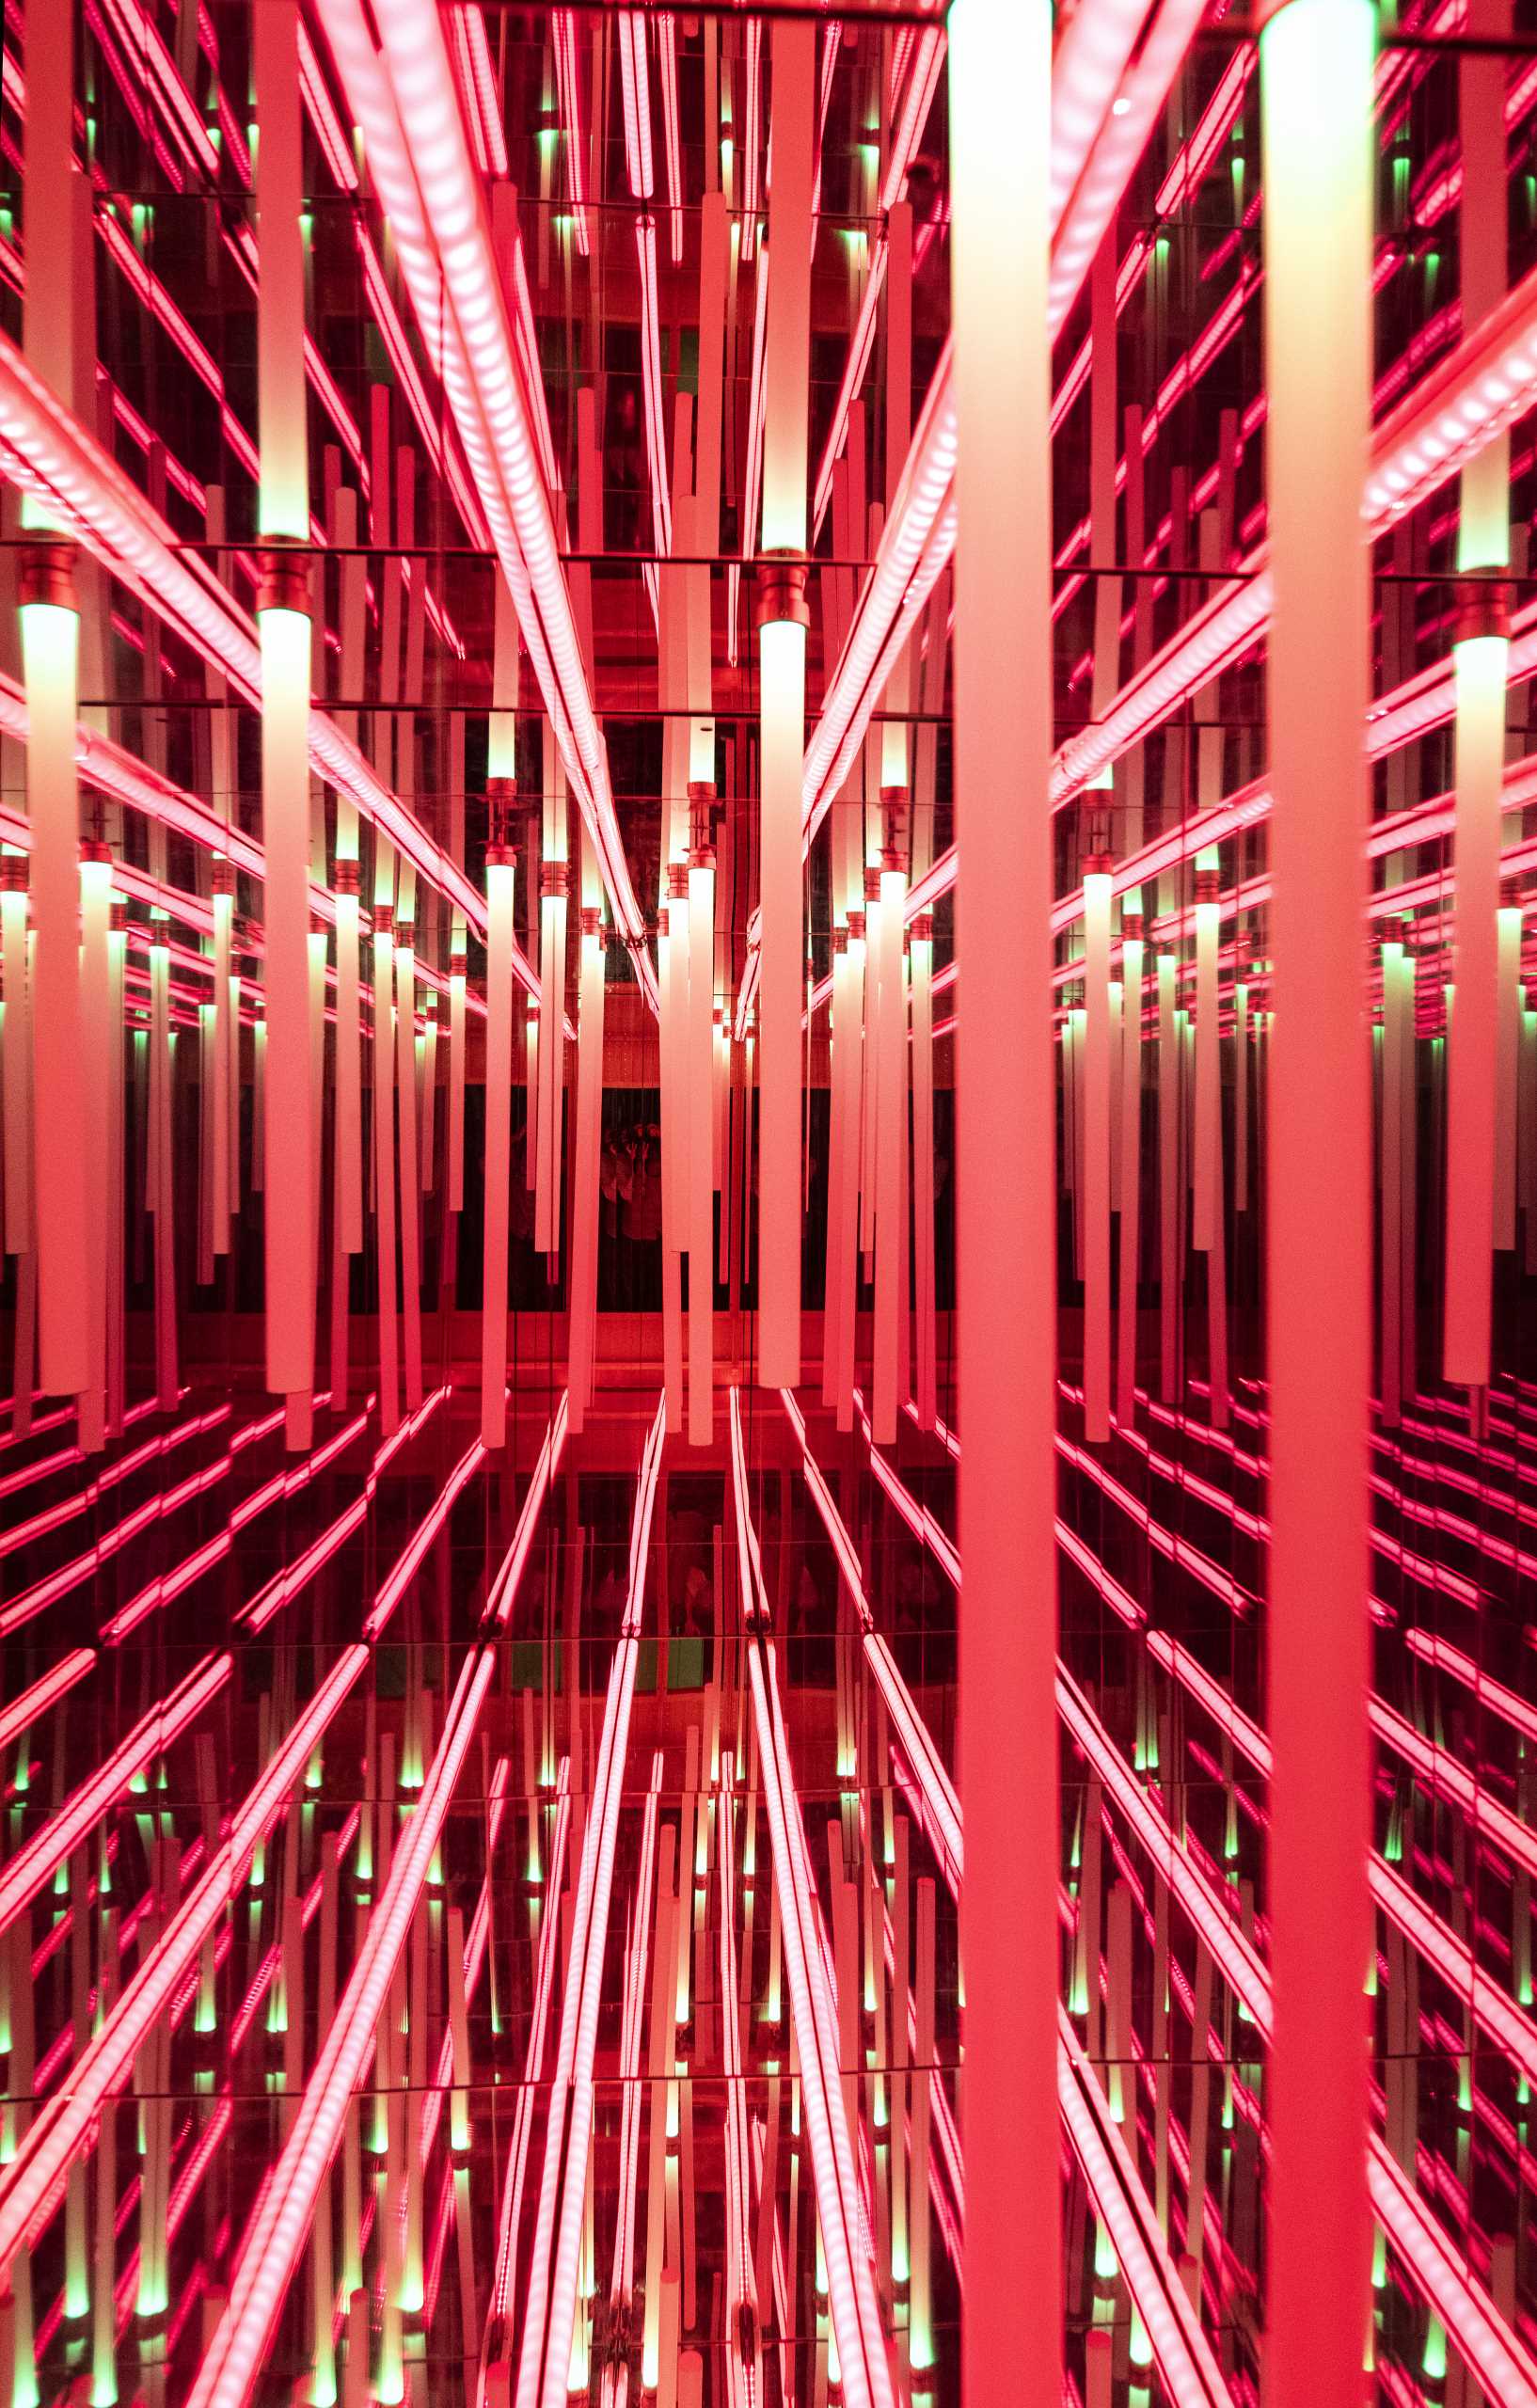 A modern ،me includes a psychedelic ‘infinity room’ that exists in a foundation quirk. Mirrors, light-tubes, and a wood viewport were used to create a unique lighting installation.